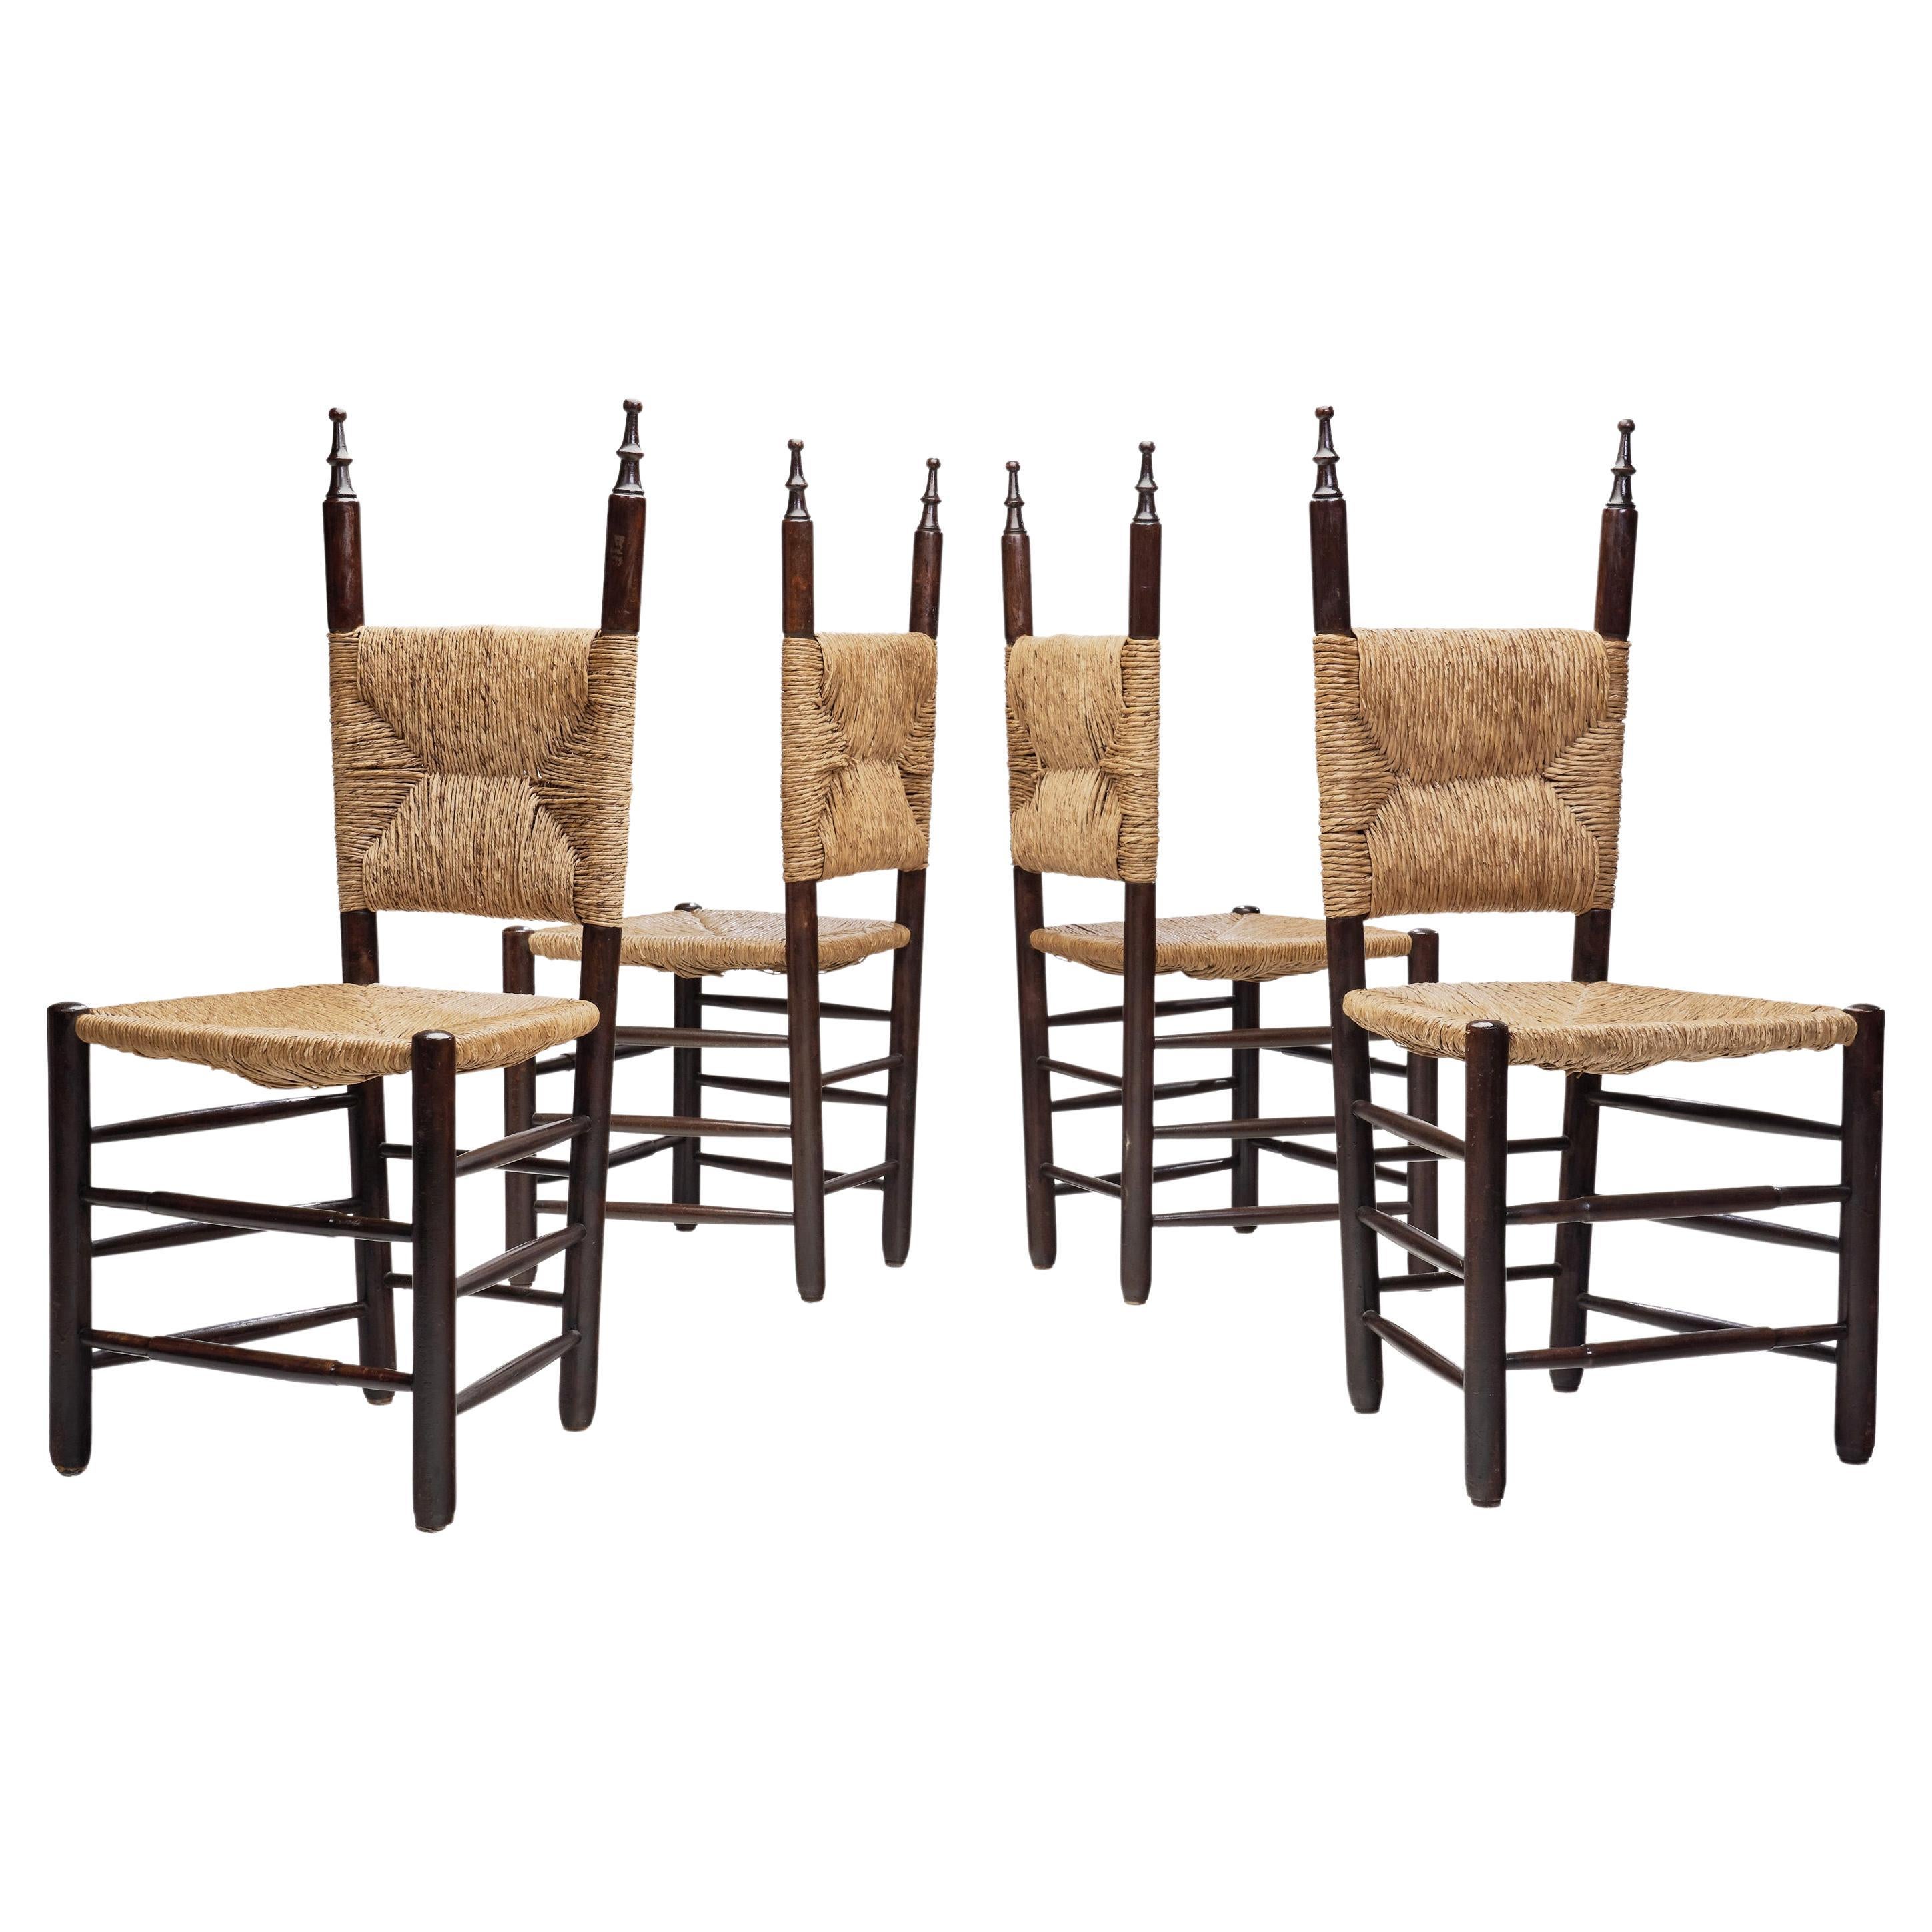 Set of Four Dining Chairs with Poplar Wood and Rush Seats, Europe ca 1950s For Sale